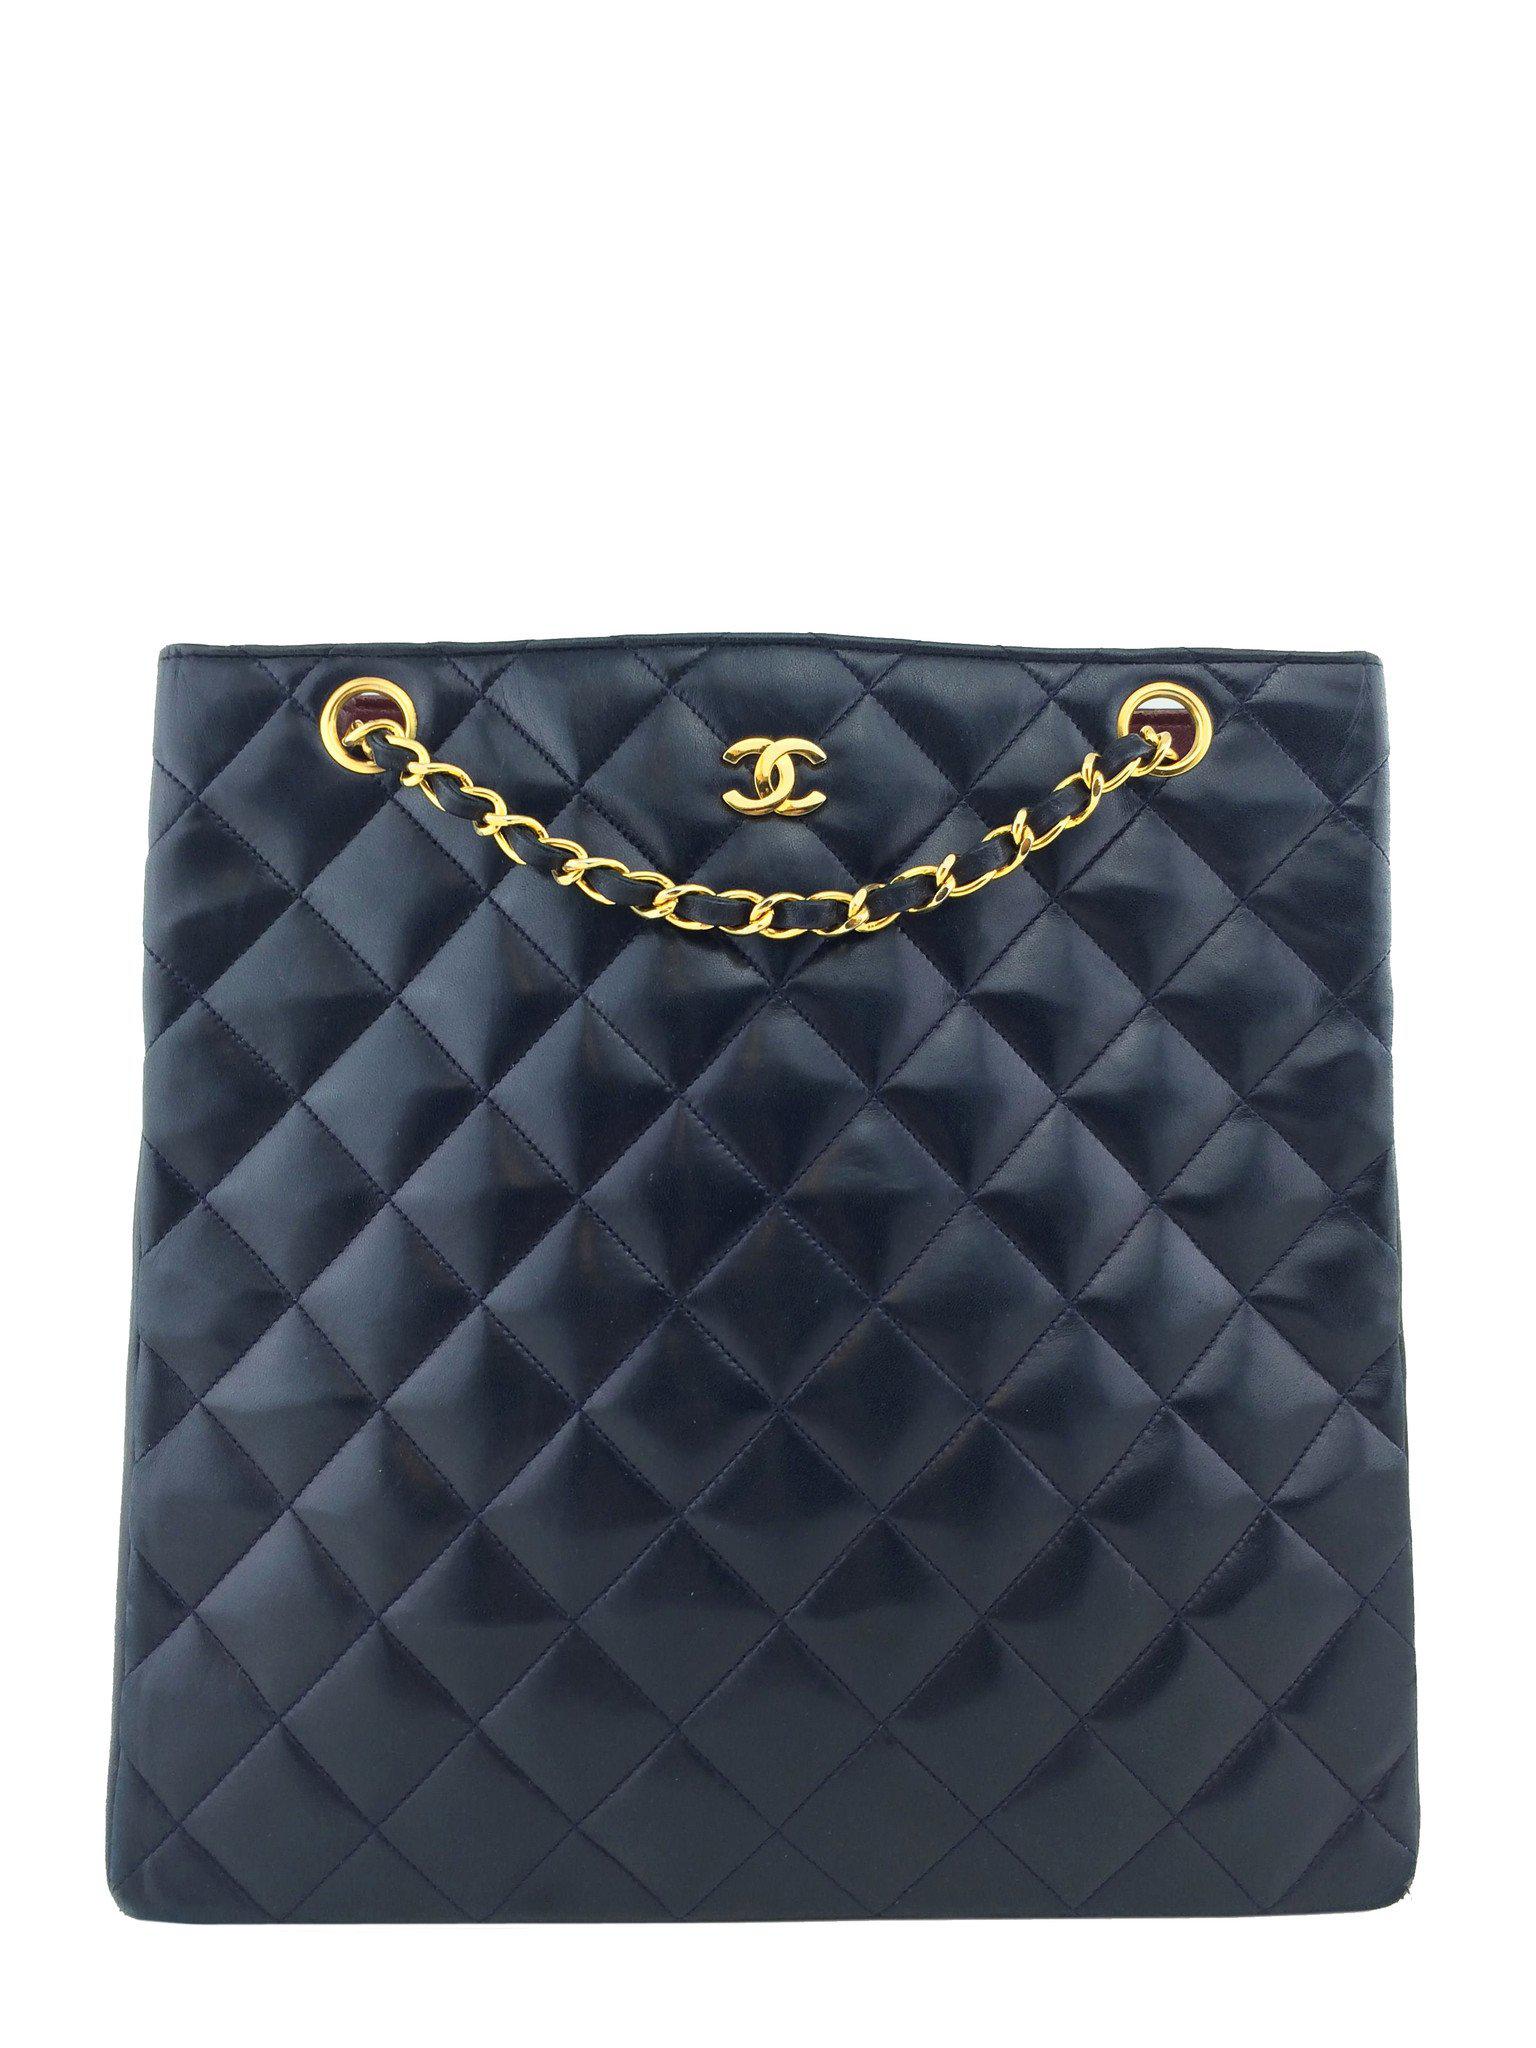 Chanel Multicolor Quilted Fabric Timeless Tote at 1stDibs  chanel  multicolor quilted bag, chanel multicolor tote bag, chanel quilted fabric  bag